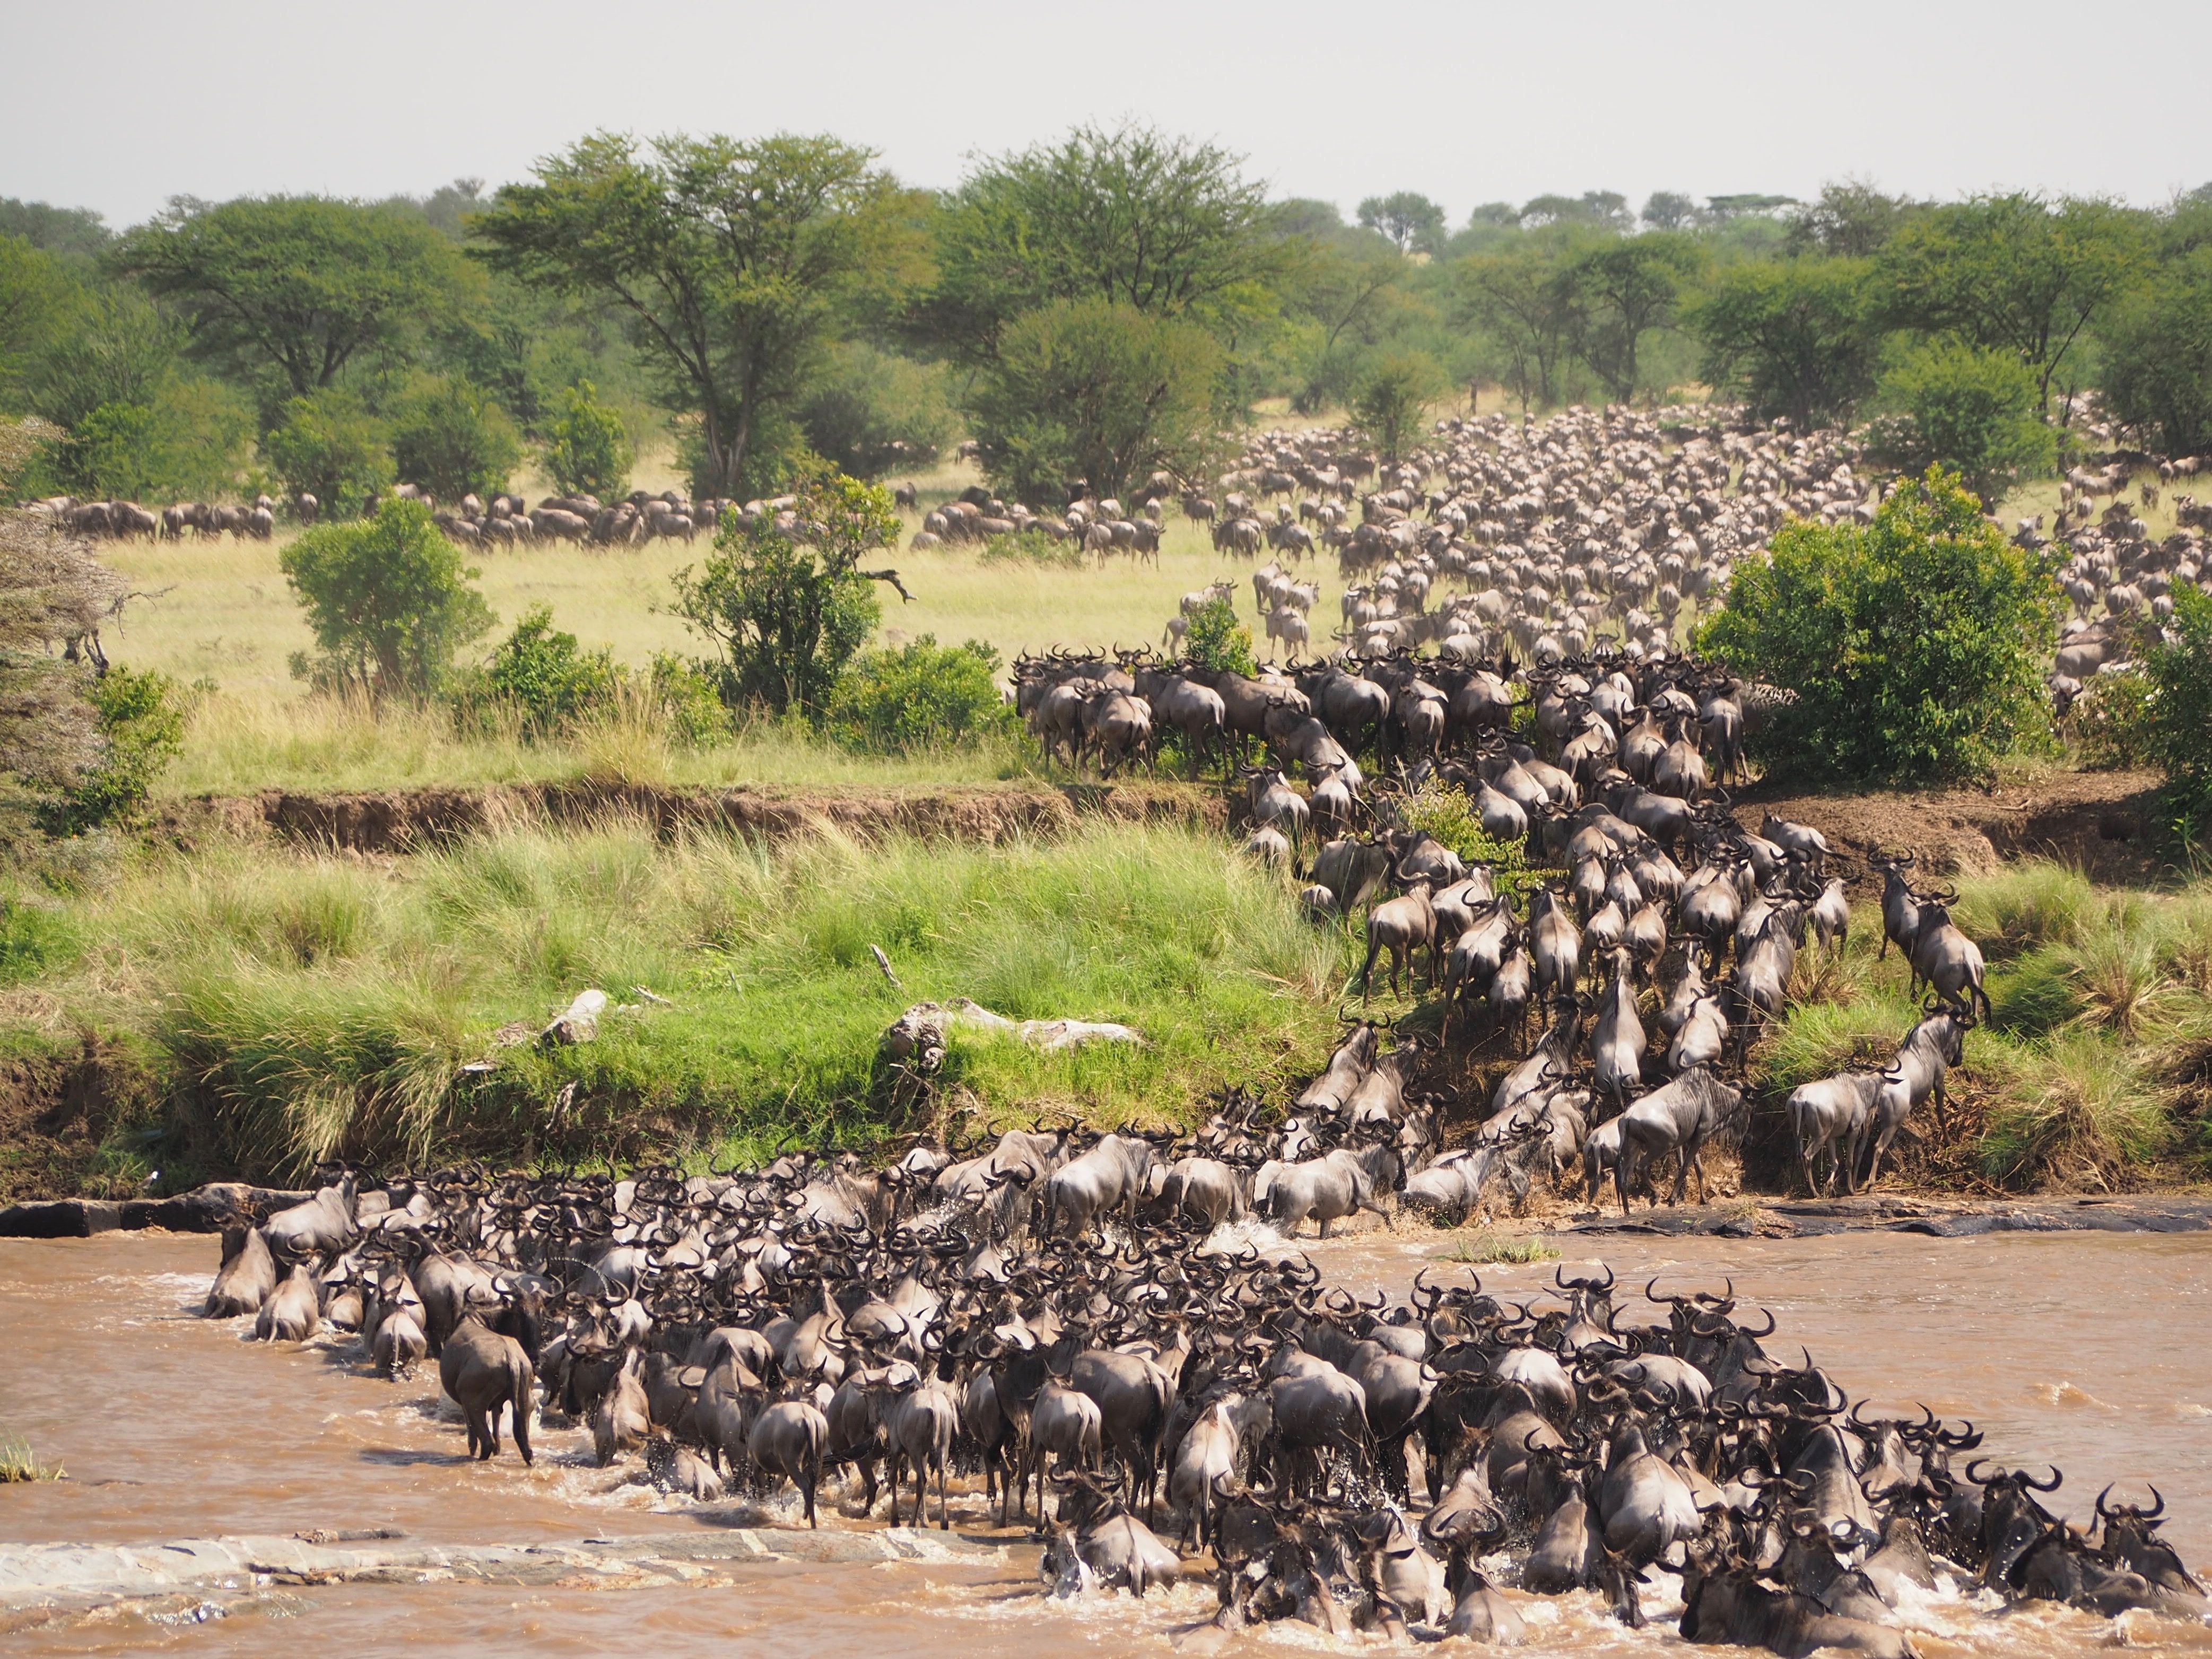 wildebeest crossing a river during daytime